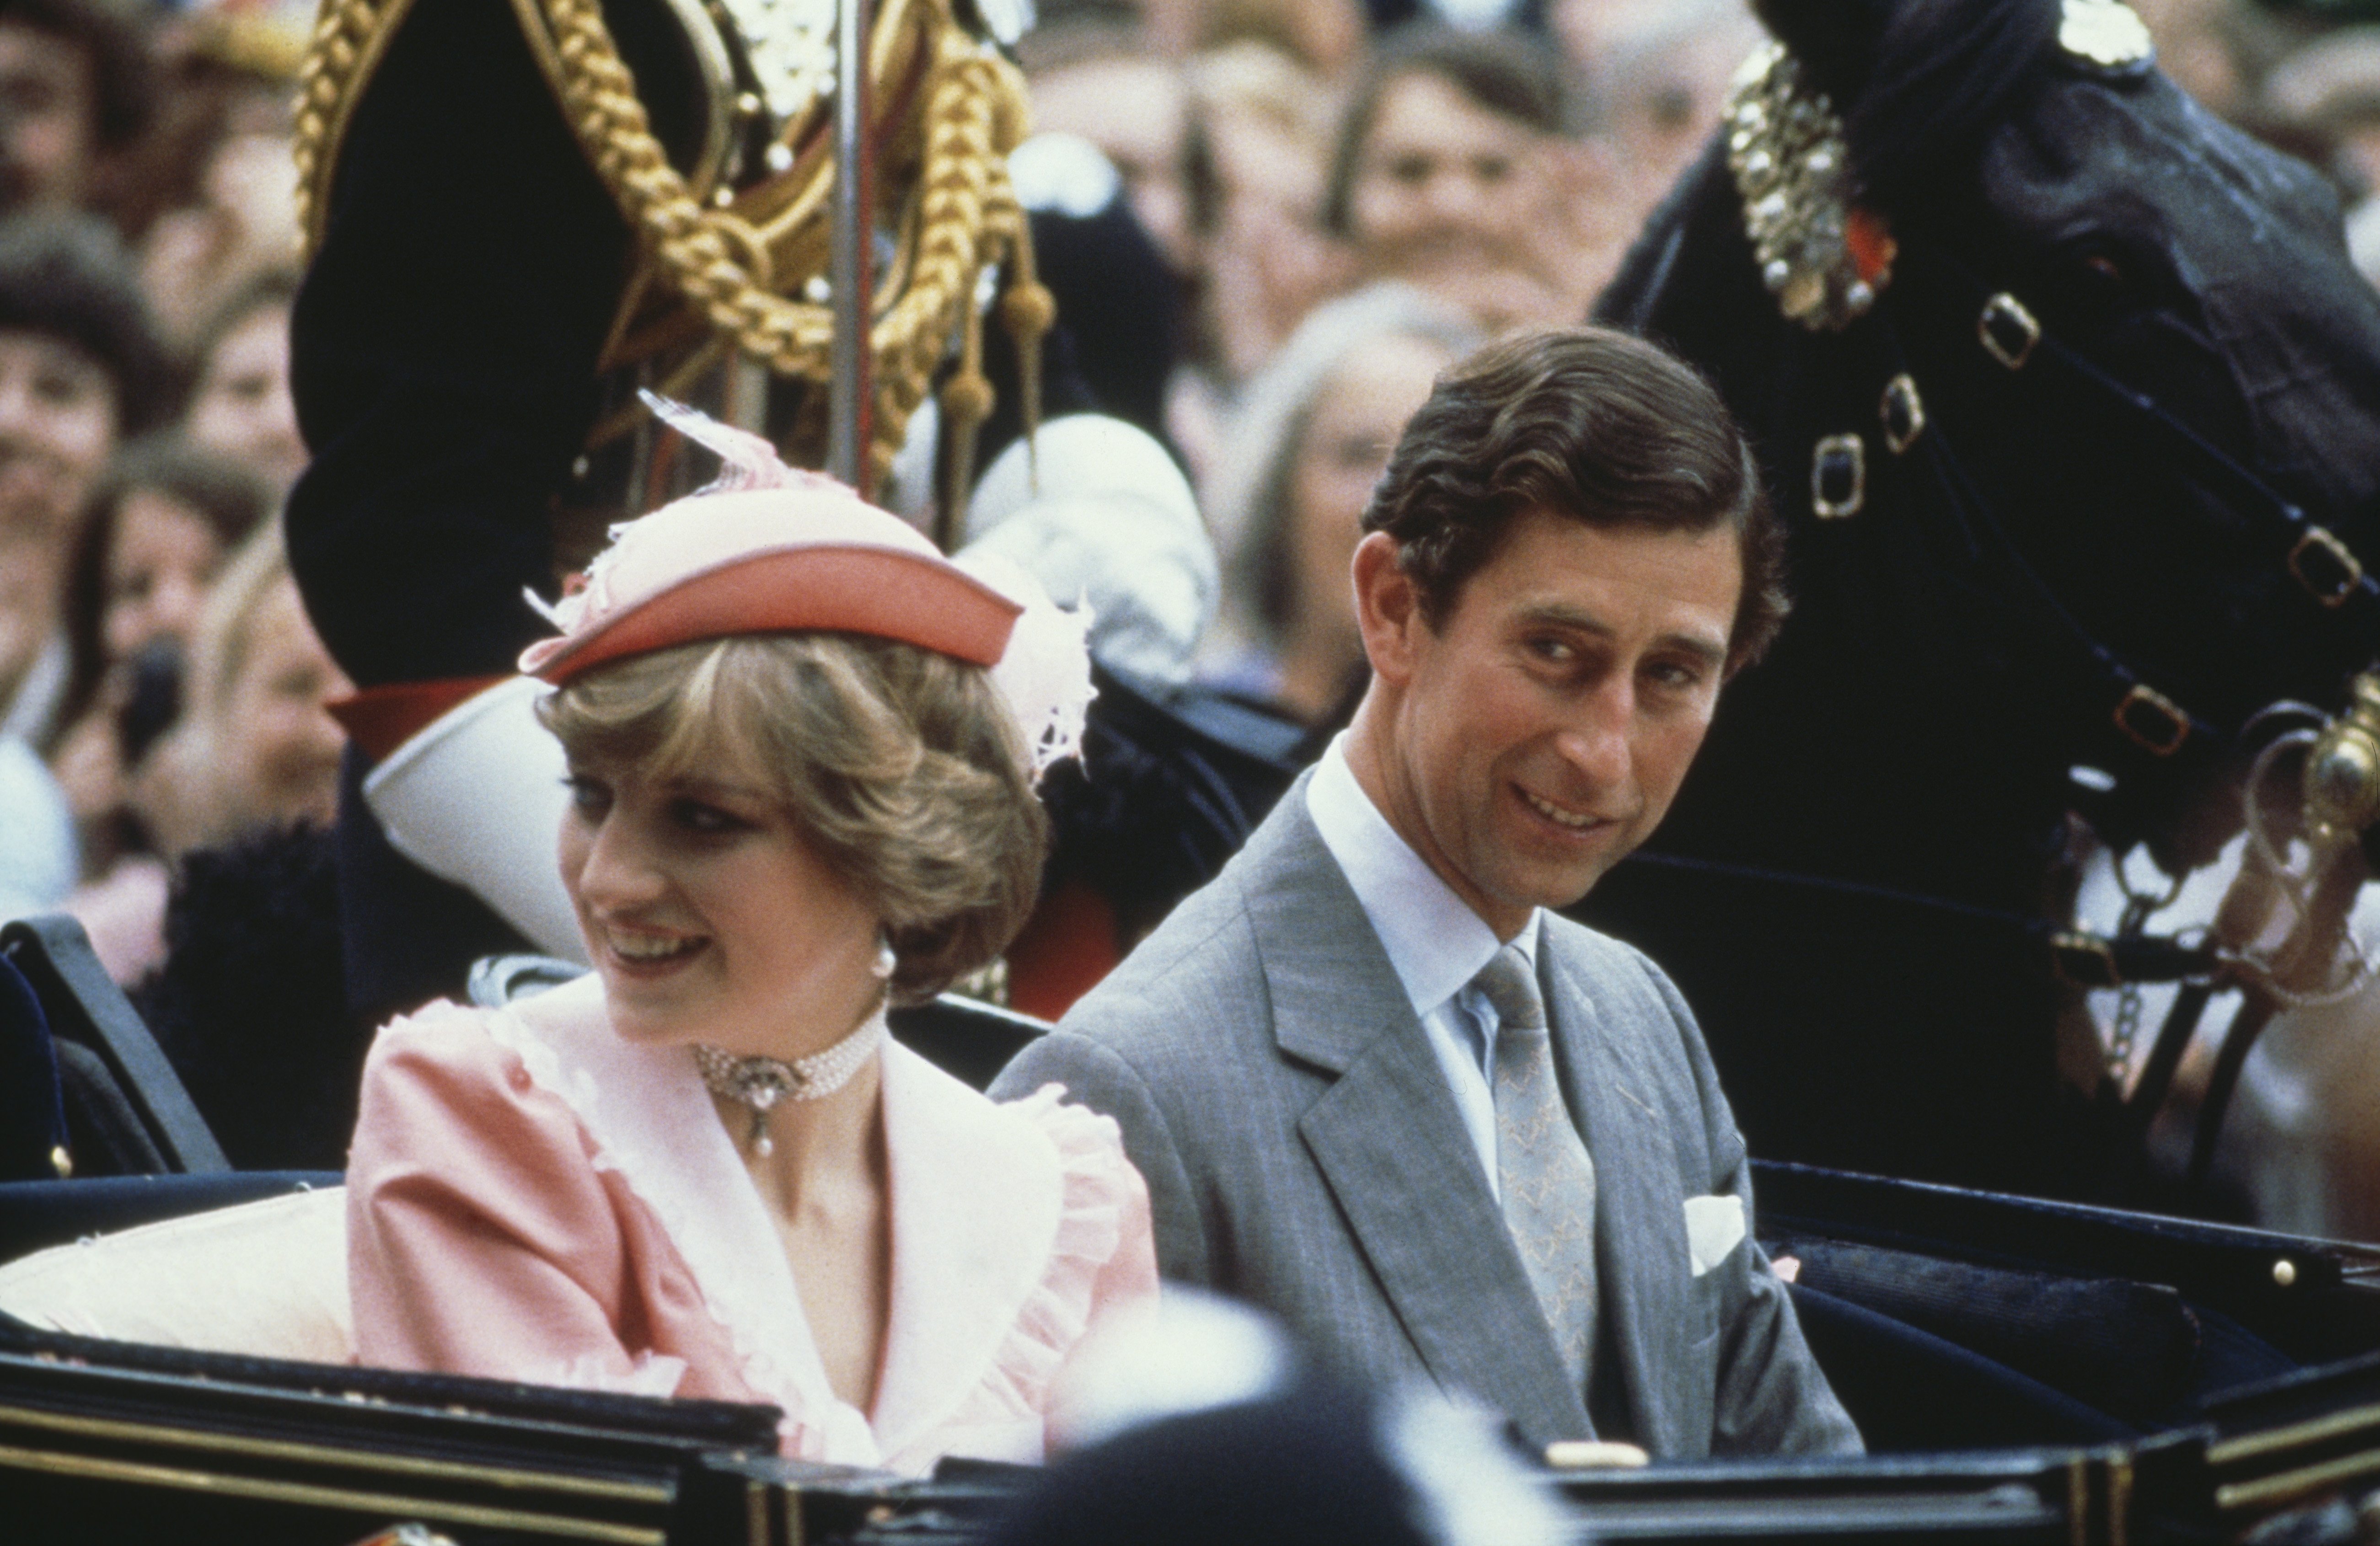 Prince Charles and Diana, Princess of Wales leave Buckingham Palace for their honeymoon after their wedding, London, 29th July 1981 | Source: Getty Images